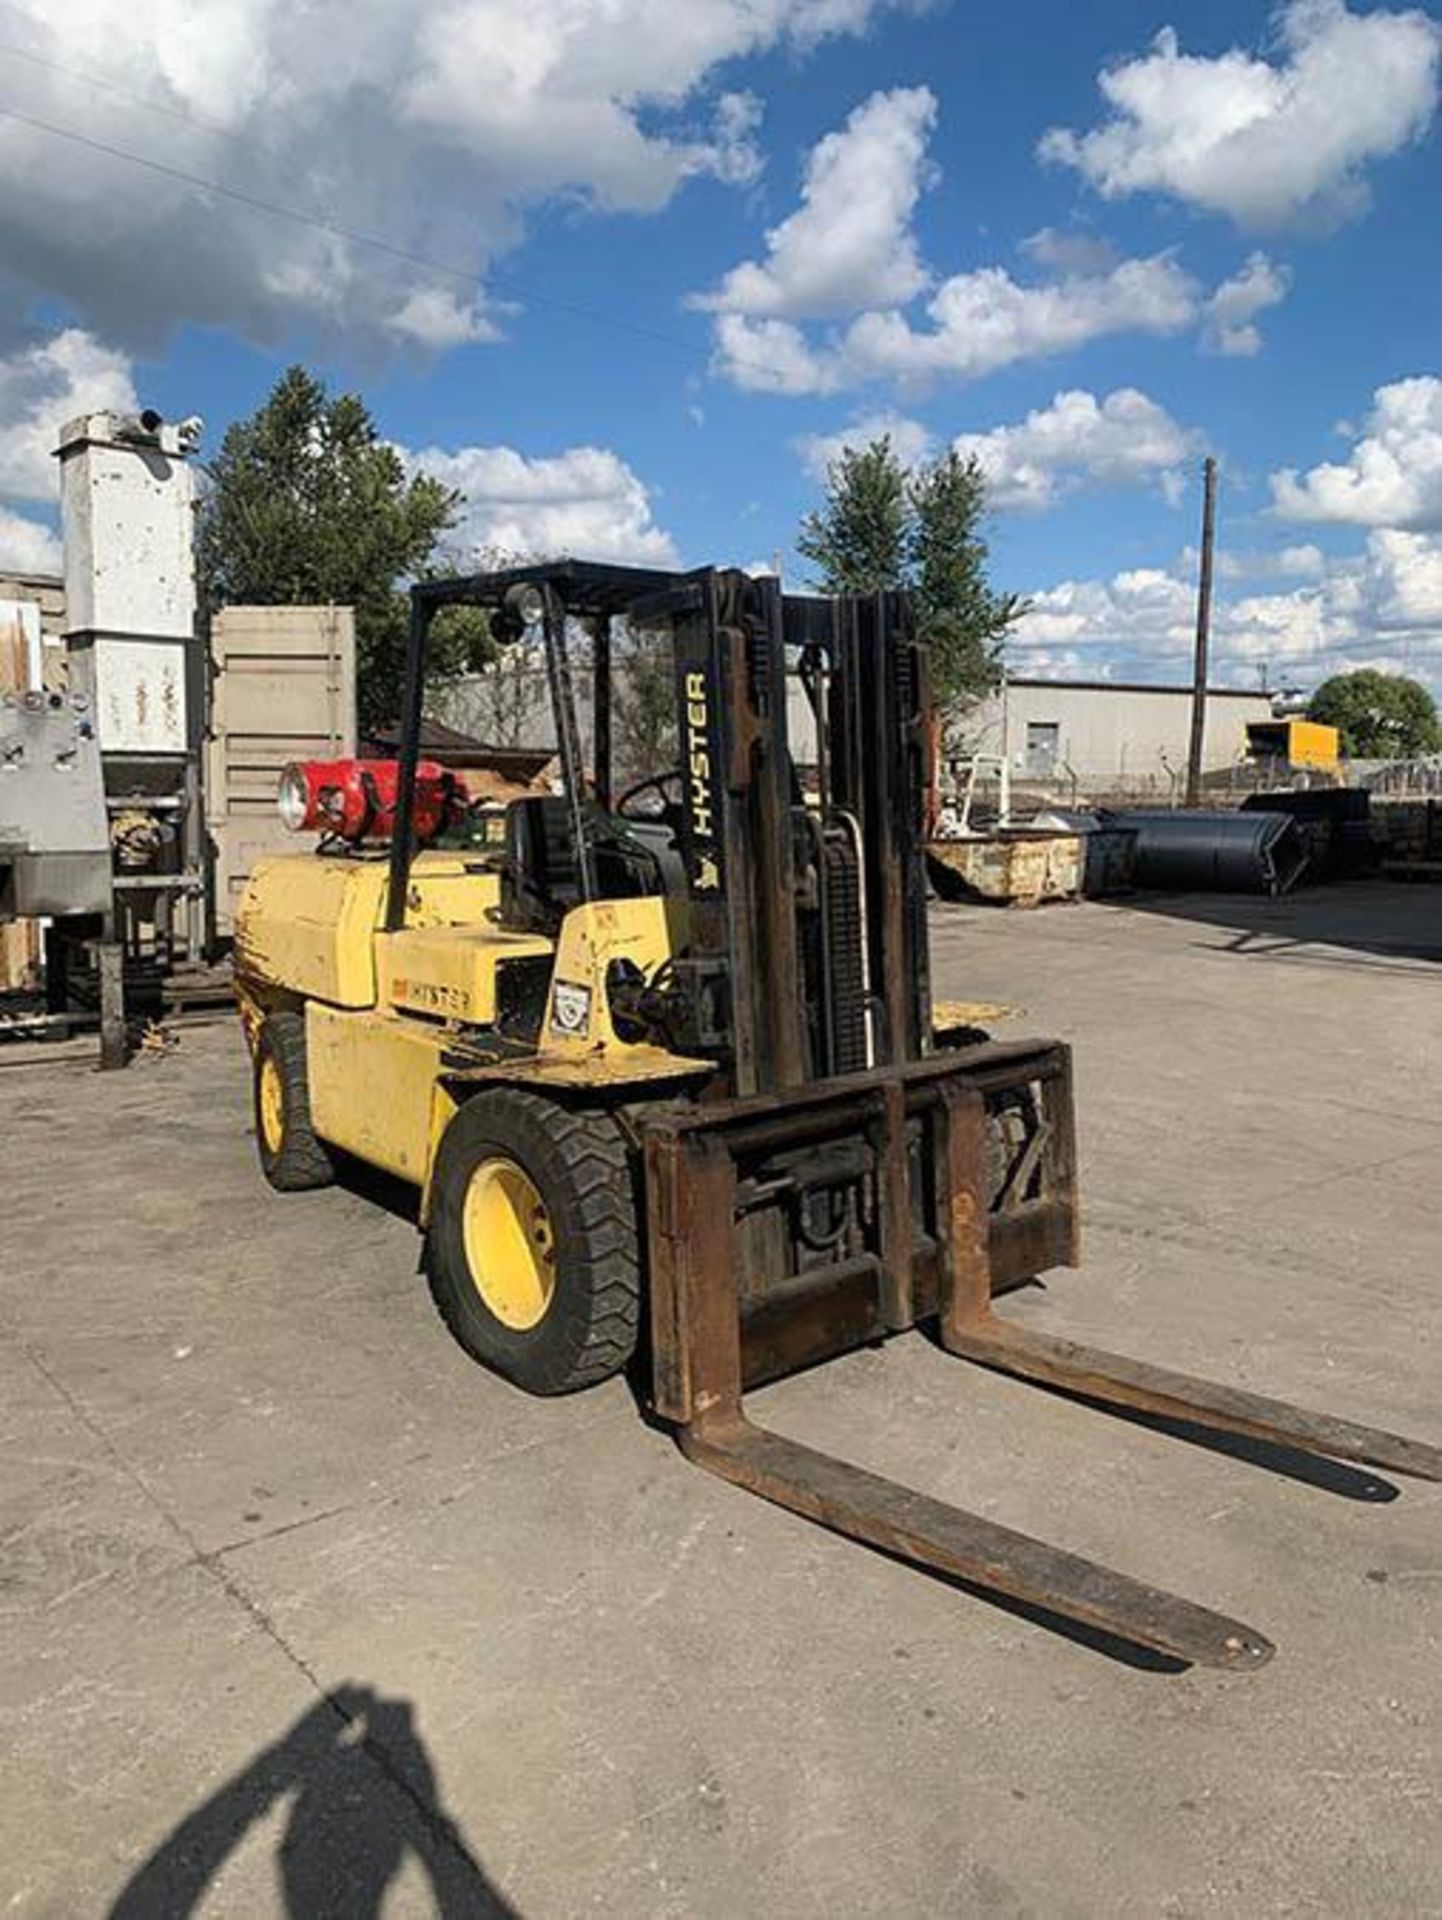 HYSTER 110, LP POWERED FORKLIFT, PNEUMATIC TIRES, 11,000 LB CAP, MODEL N/A, TRIPLE STAGE MAST